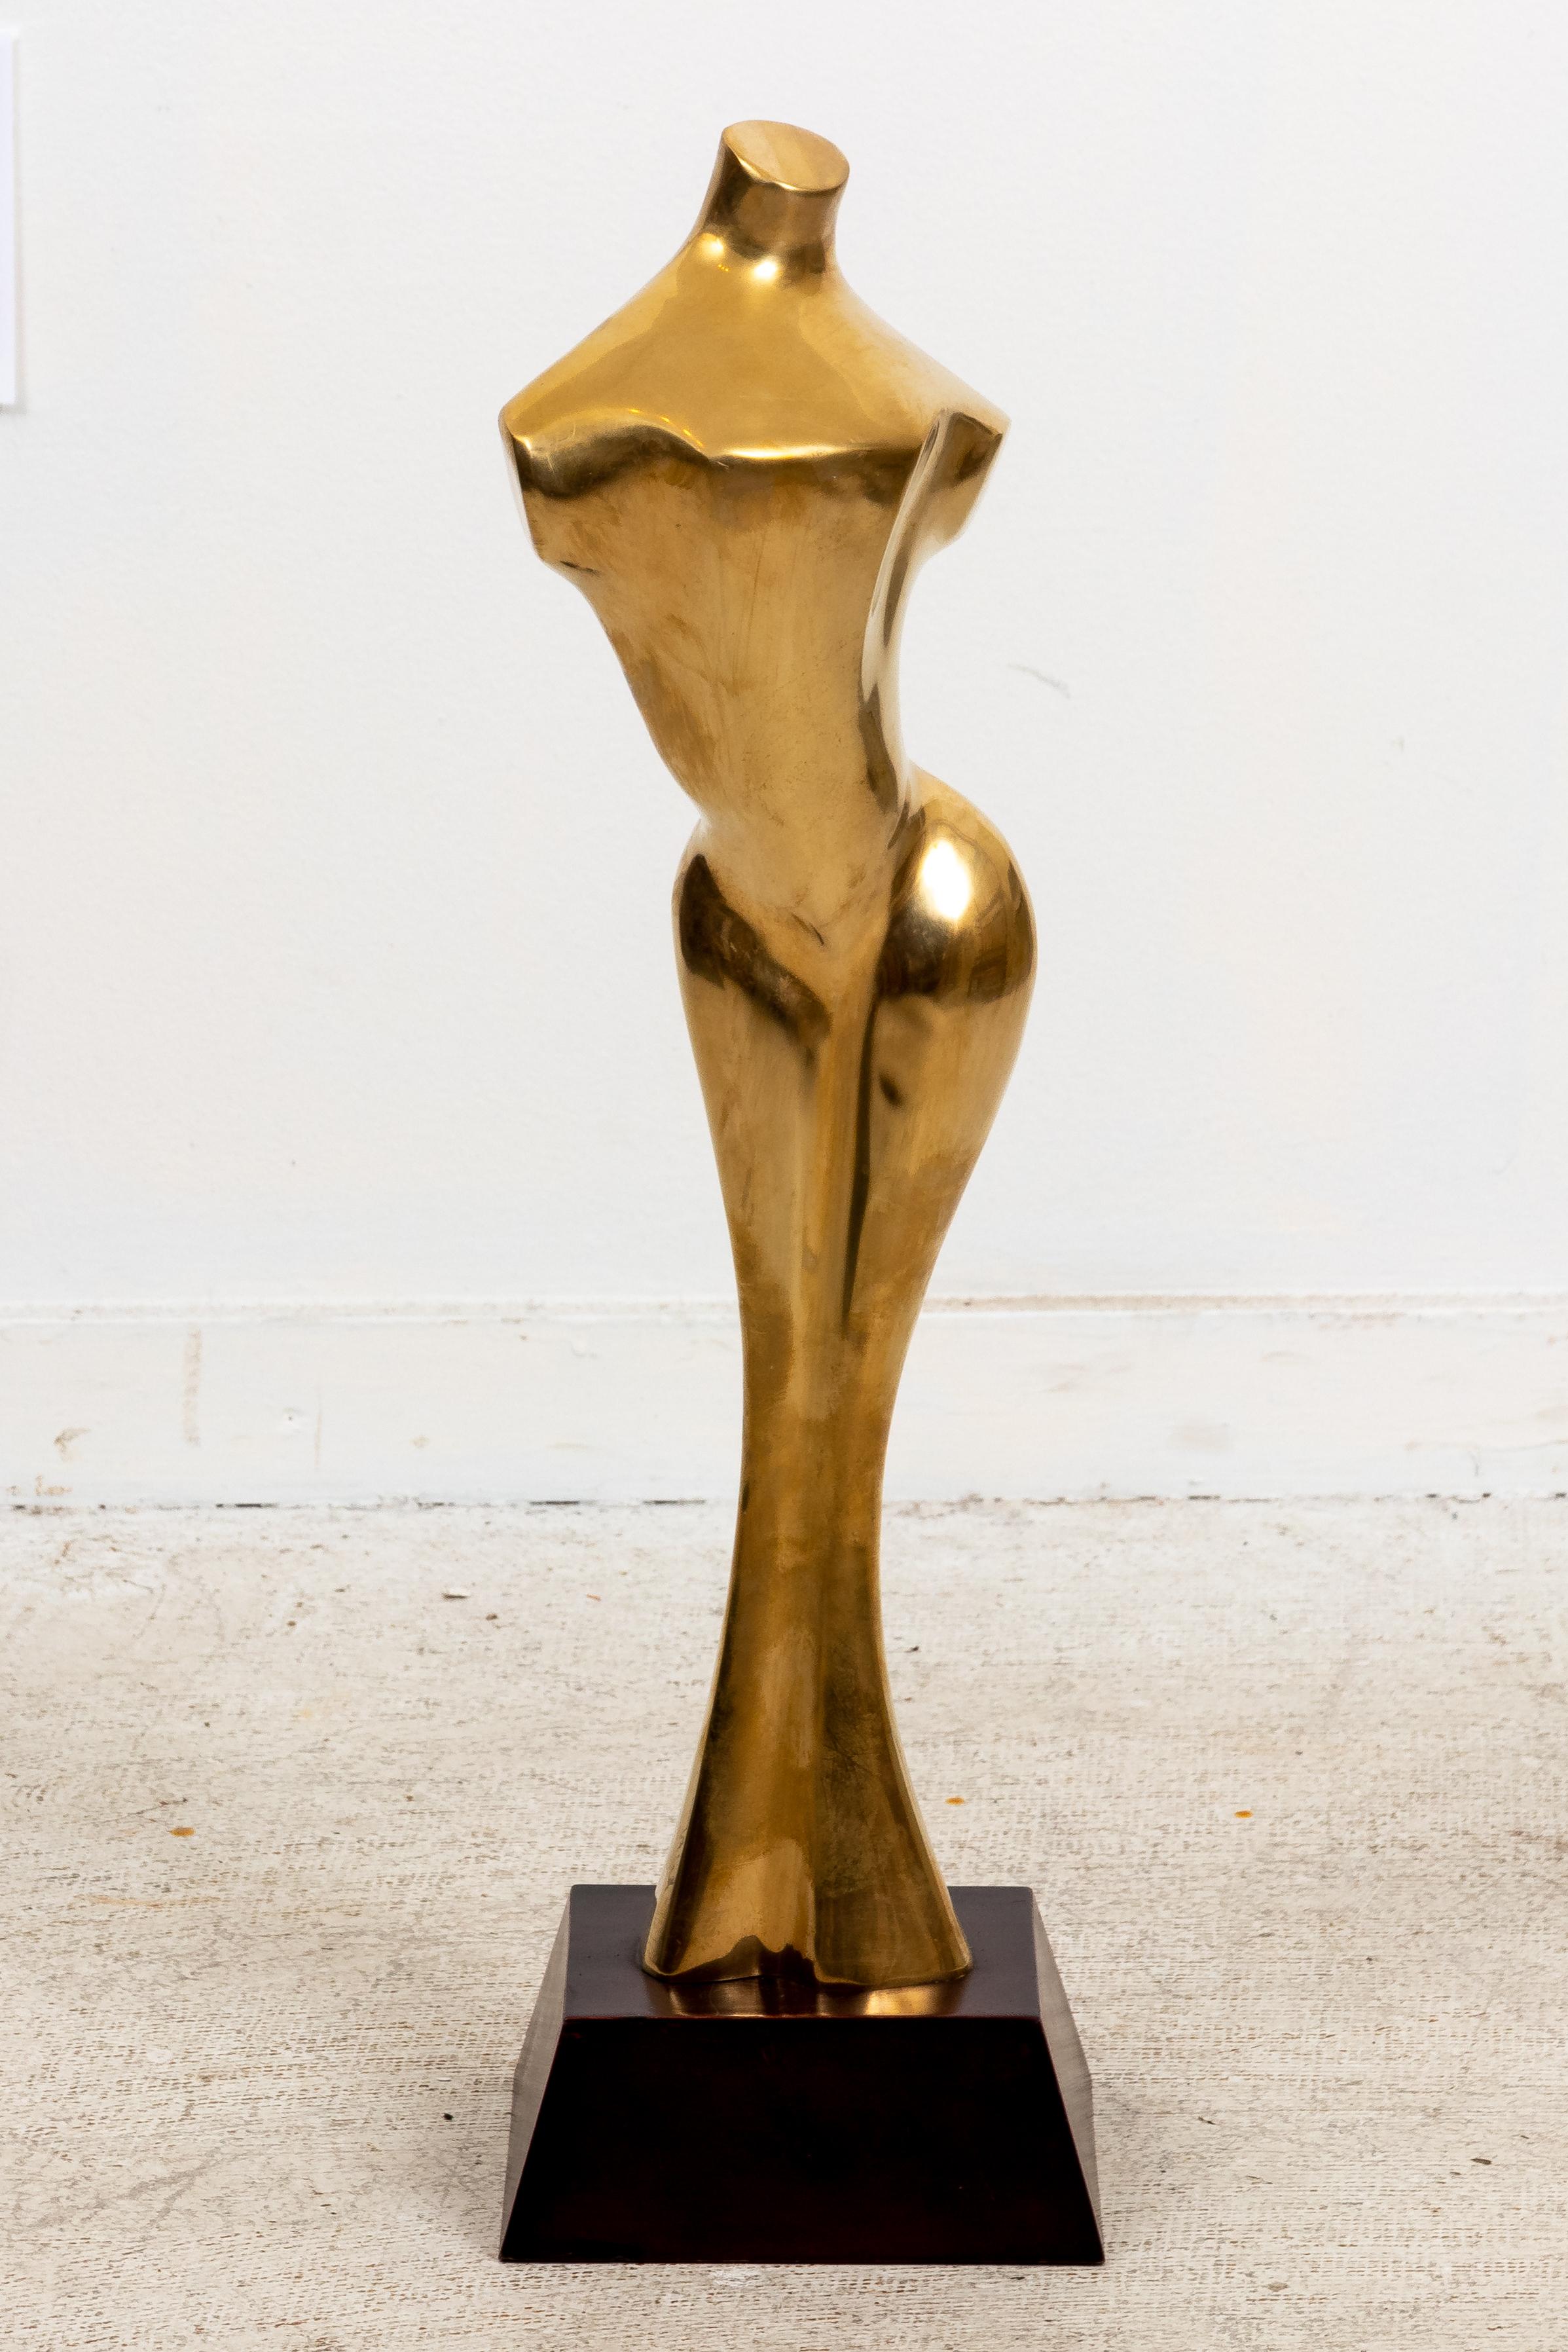 A very good quality decorative mid to late -20th century large hollow cast brass classical style nude torso sculpture in the manner of Jean Arp. Mounted on wood base.